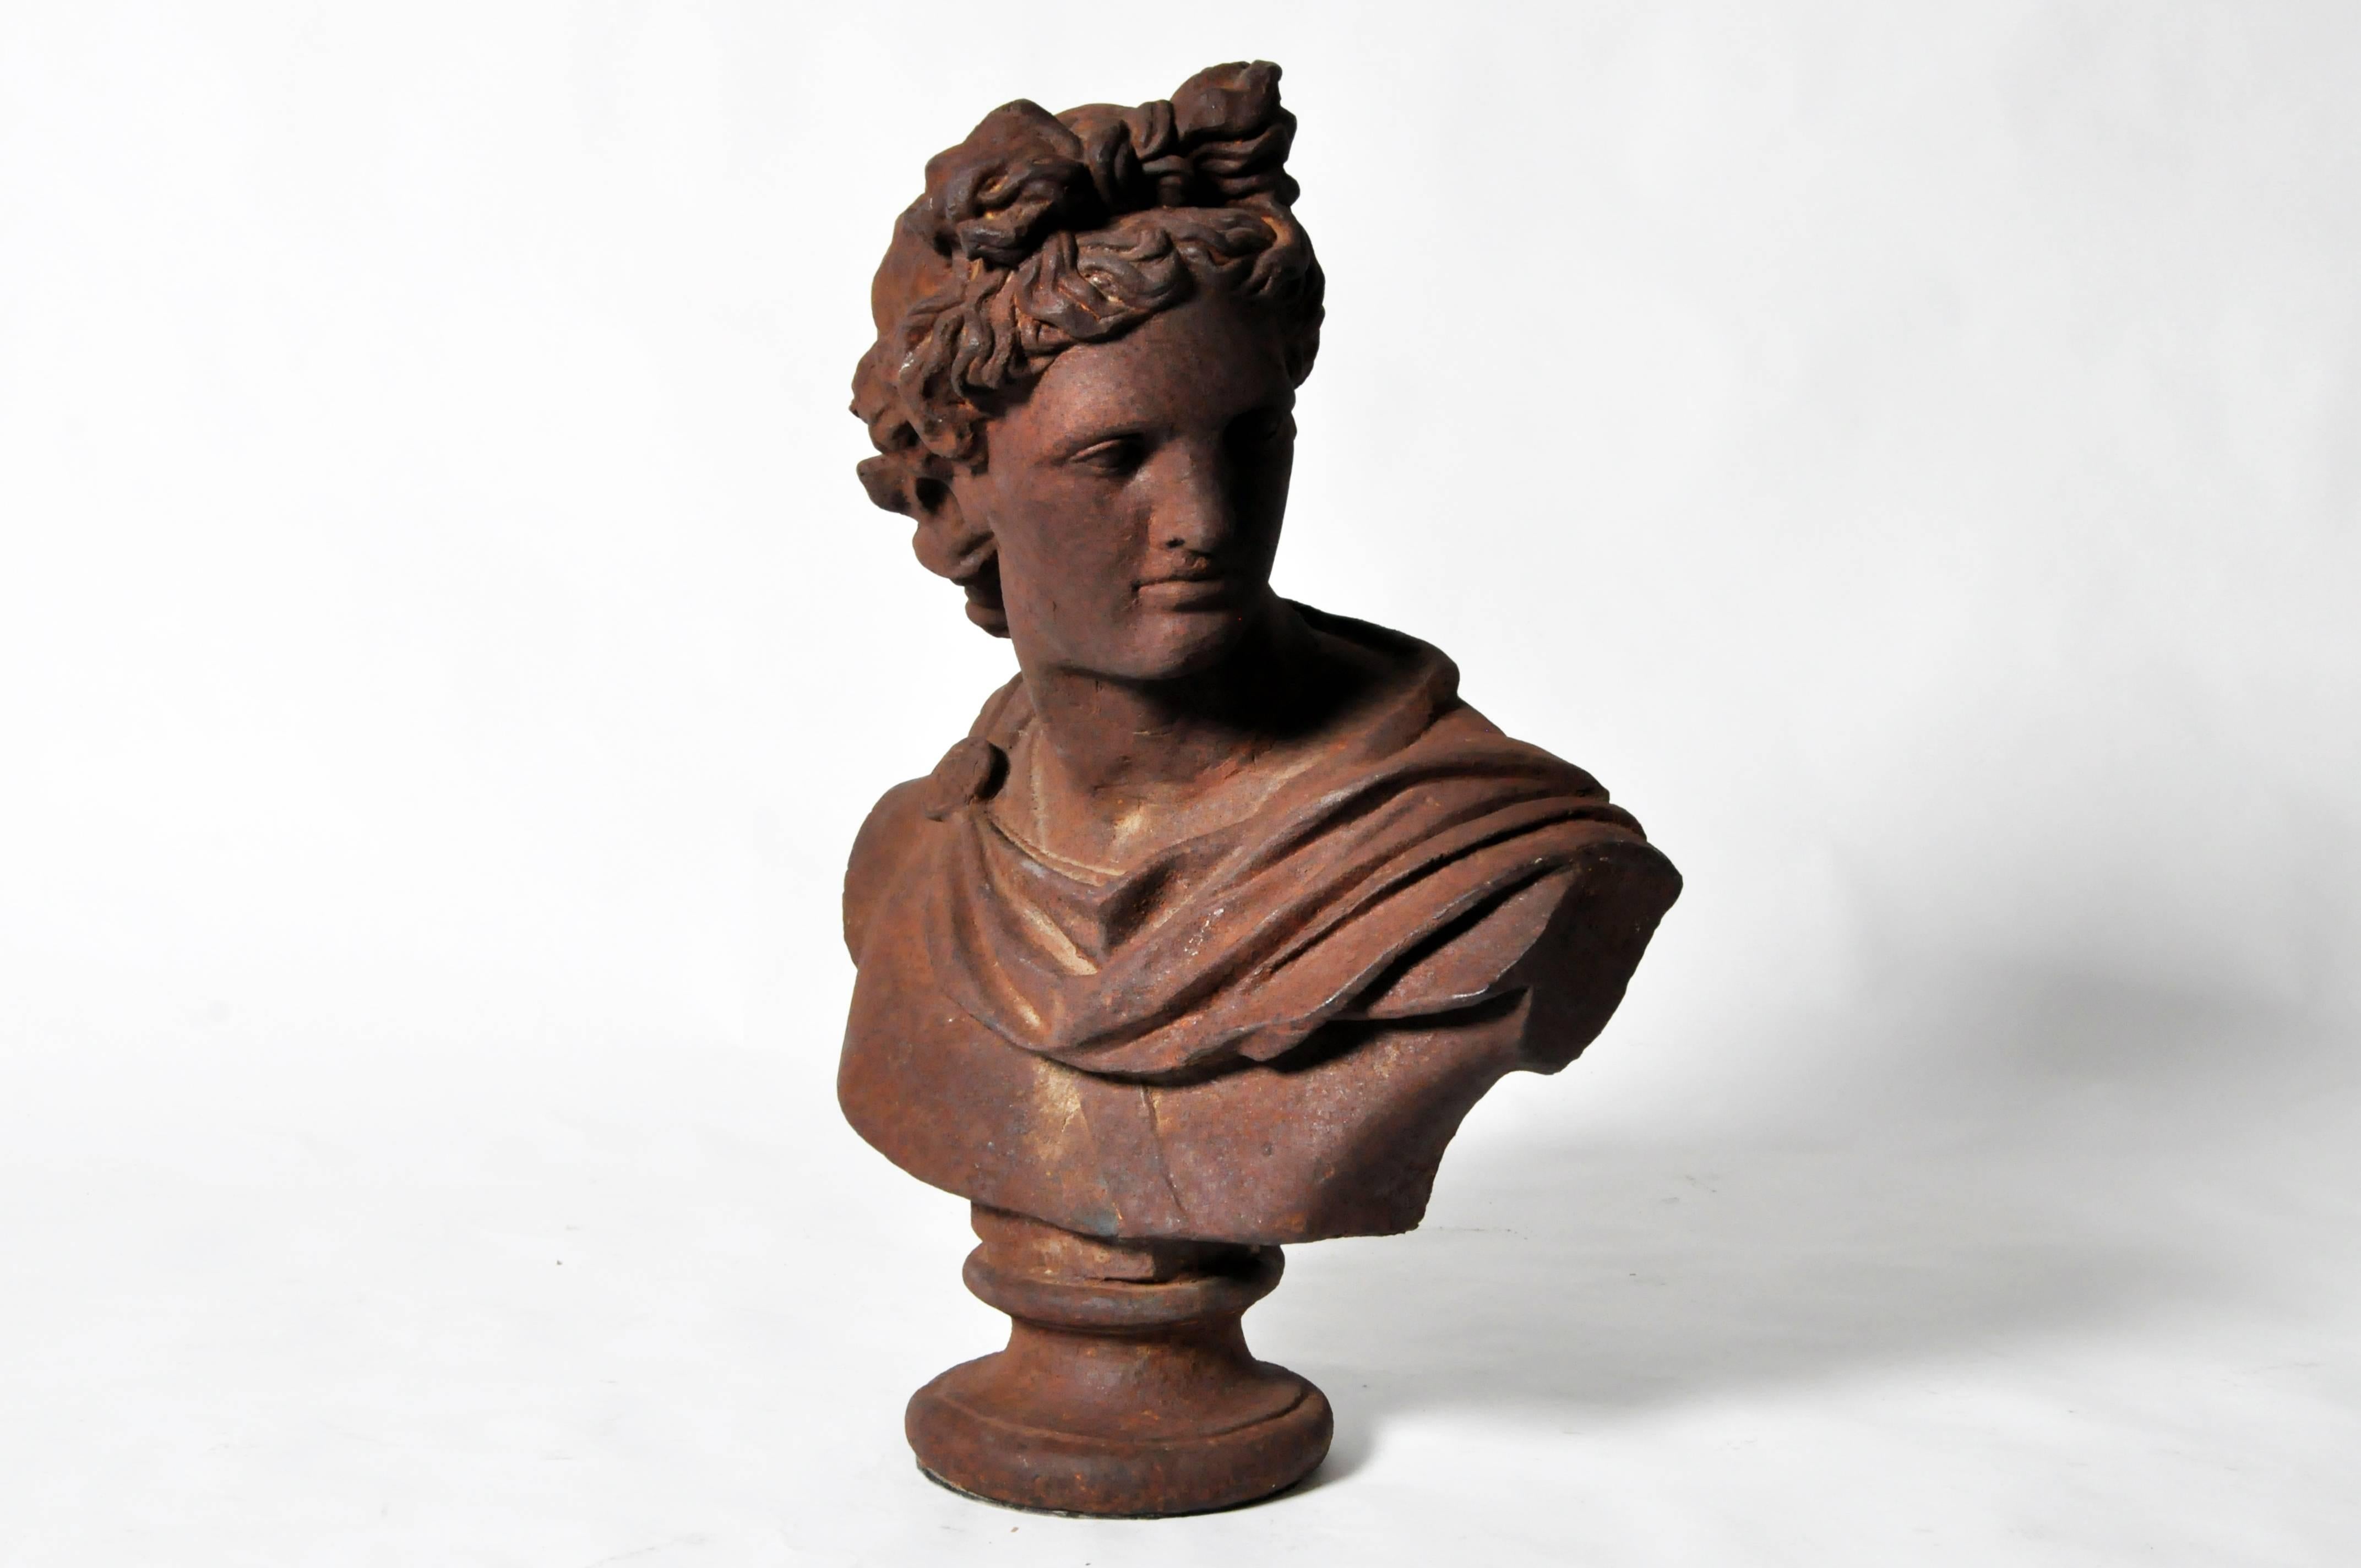 This bust replicates the celebrated marble sculpture found in the Vatican Museum. Depicted in extraordinary lifelike detail with a full head of curled tendrils and a calm, yet focused expression, Apollo is looking over his left shoulder in the